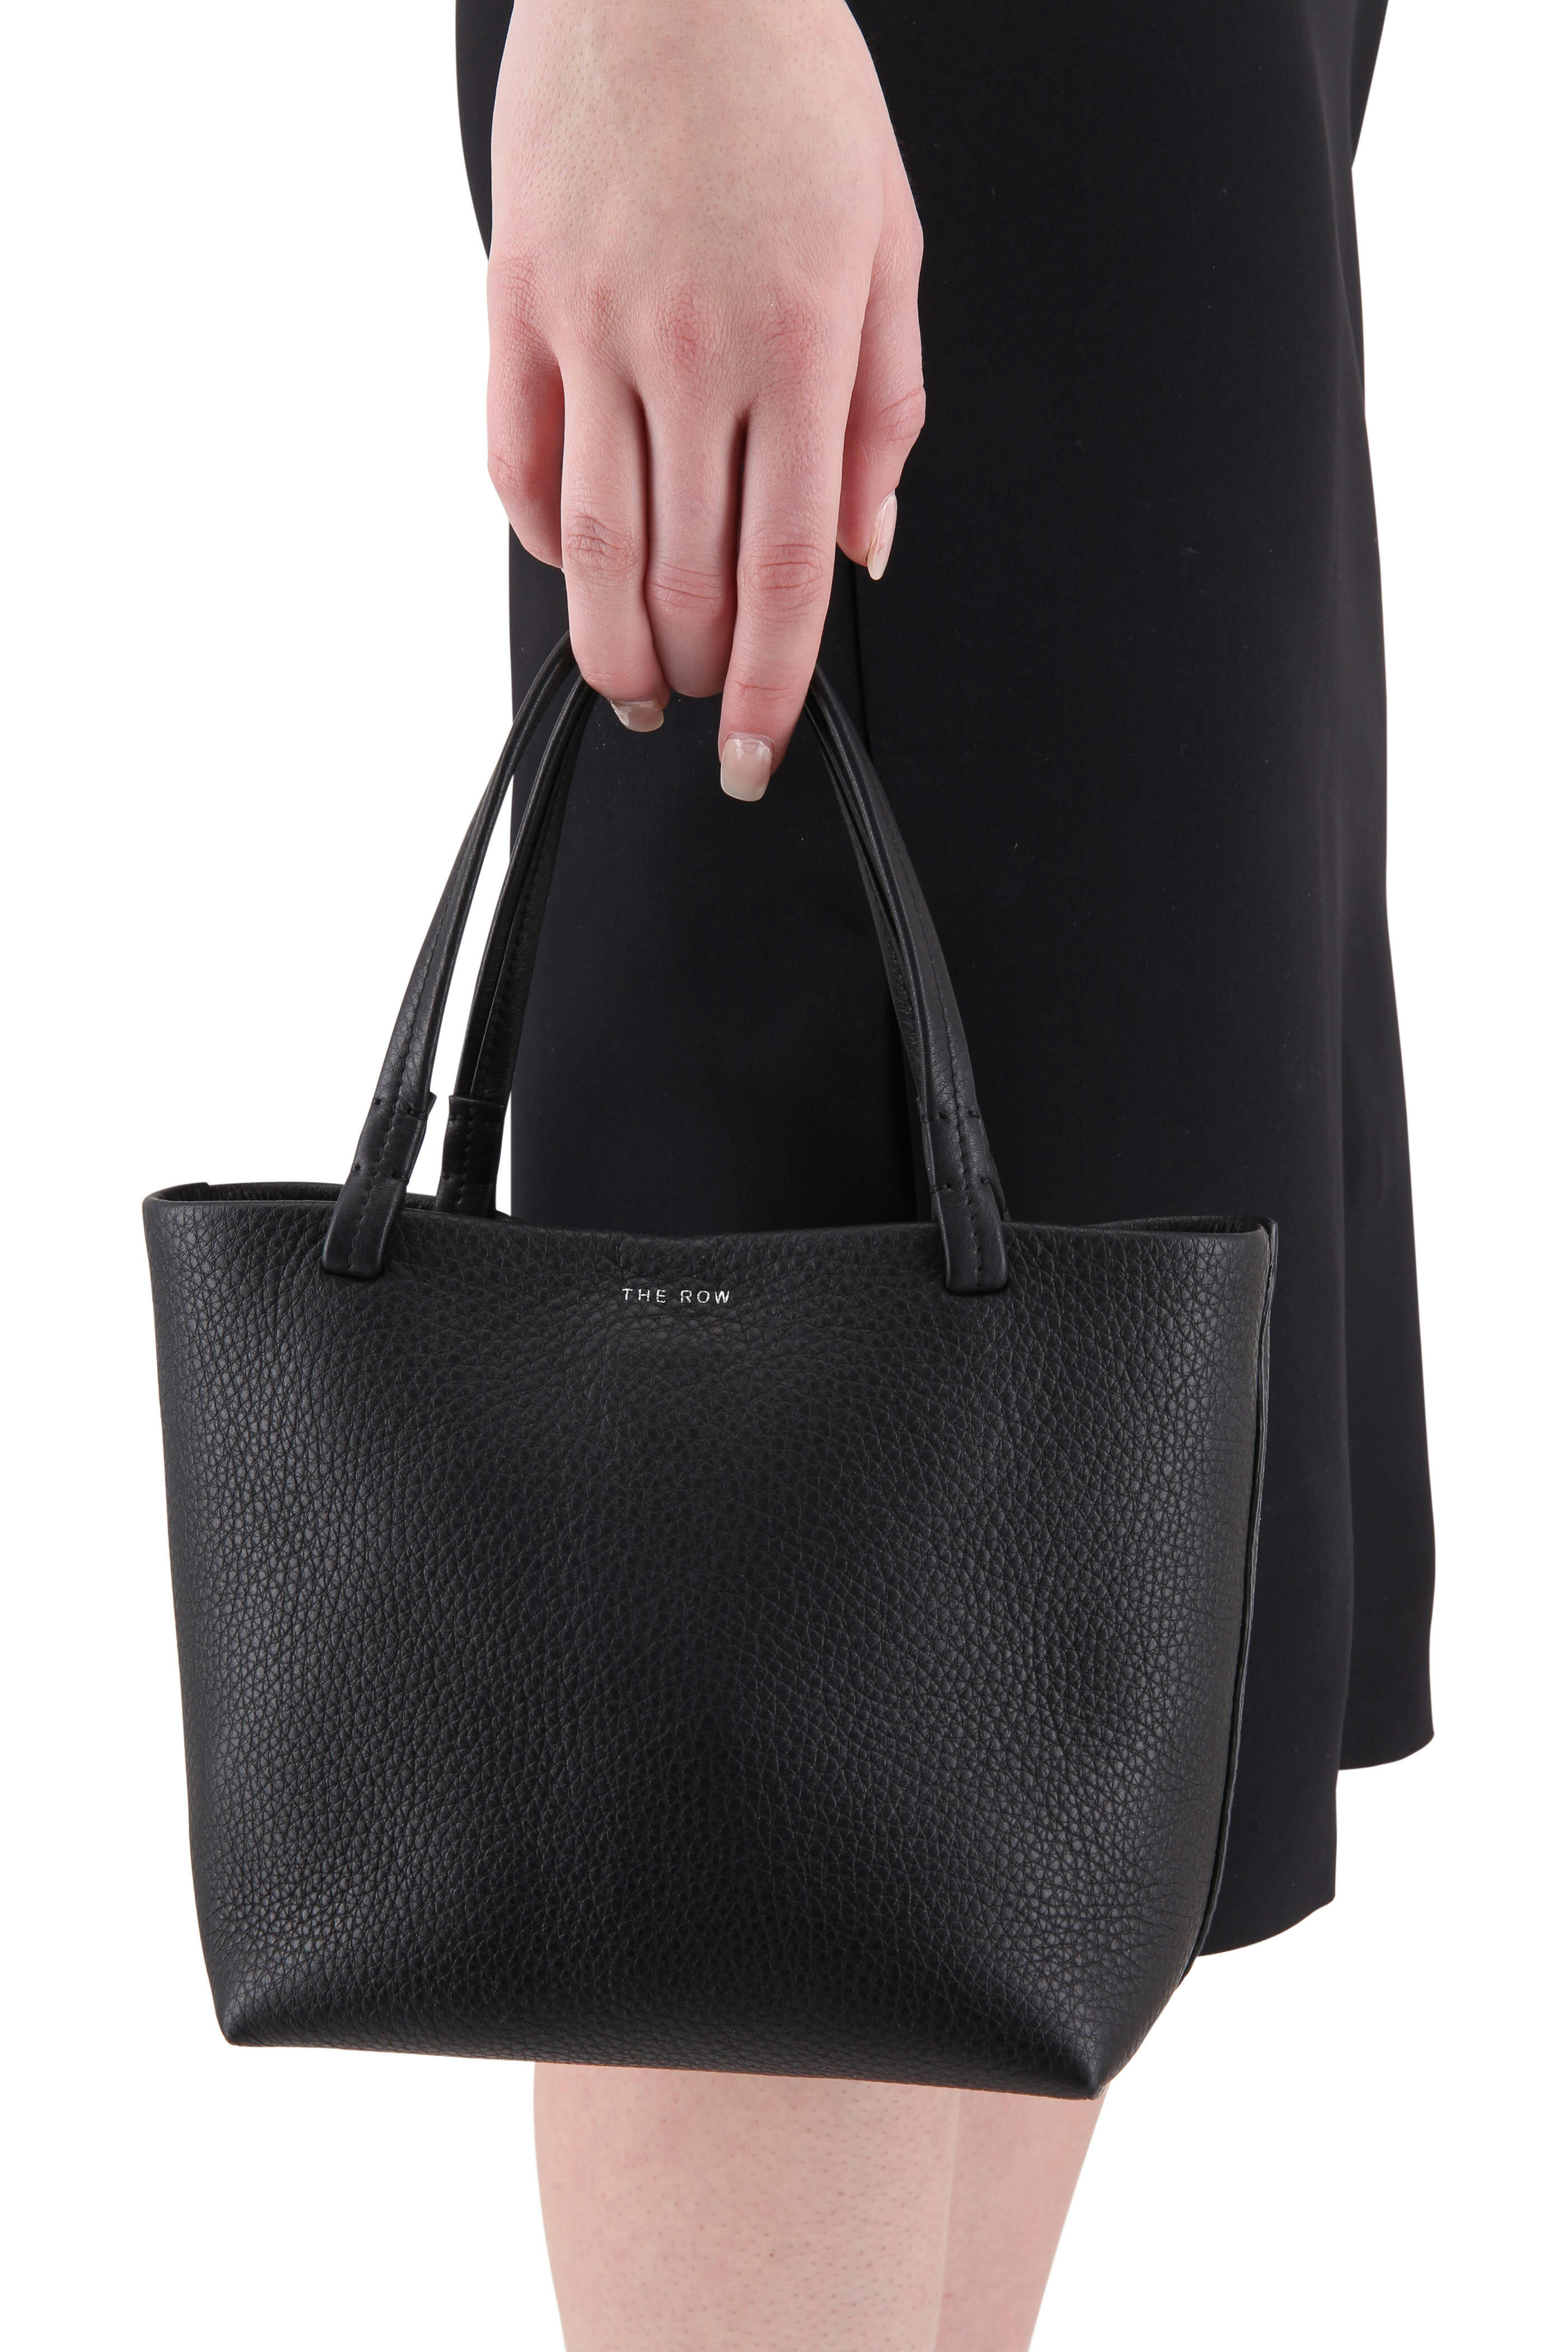 The Row Small Leather E/w Day Luxe Top-handle Bag in Black